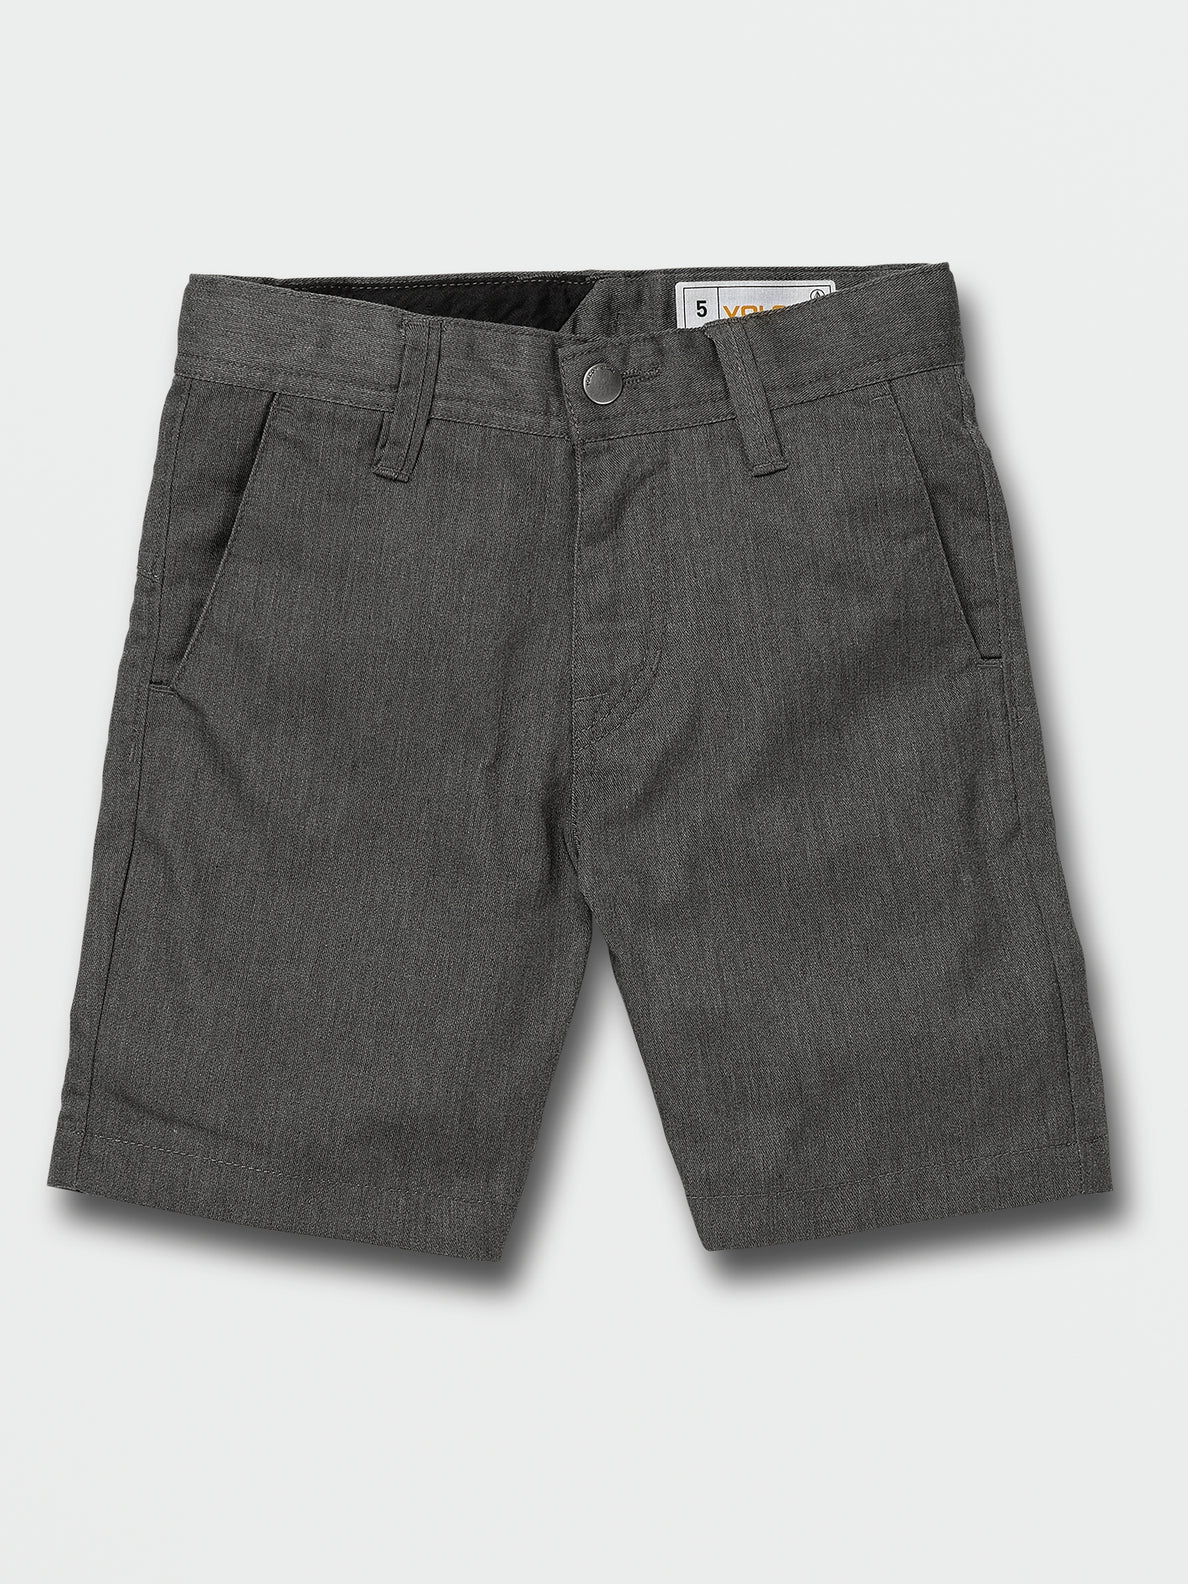 Little Boys Frickin Chino Shorts - Charcoal Heather (Y0912030_CHH) [F]